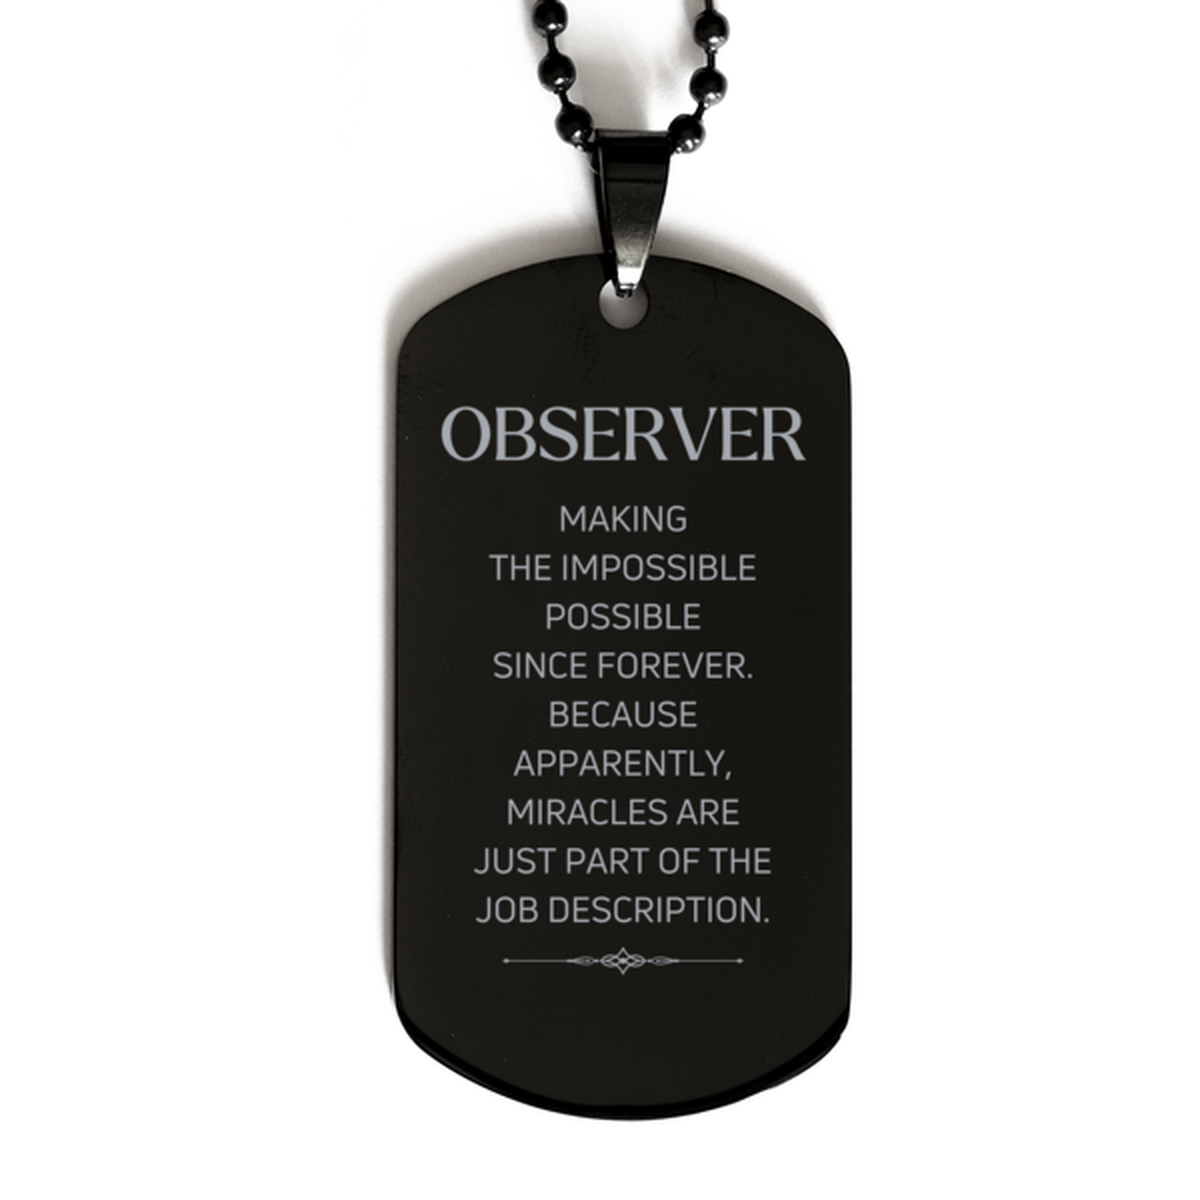 Funny Observer Gifts, Miracles are just part of the job description, Inspirational Birthday Black Dog Tag For Observer, Men, Women, Coworkers, Friends, Boss